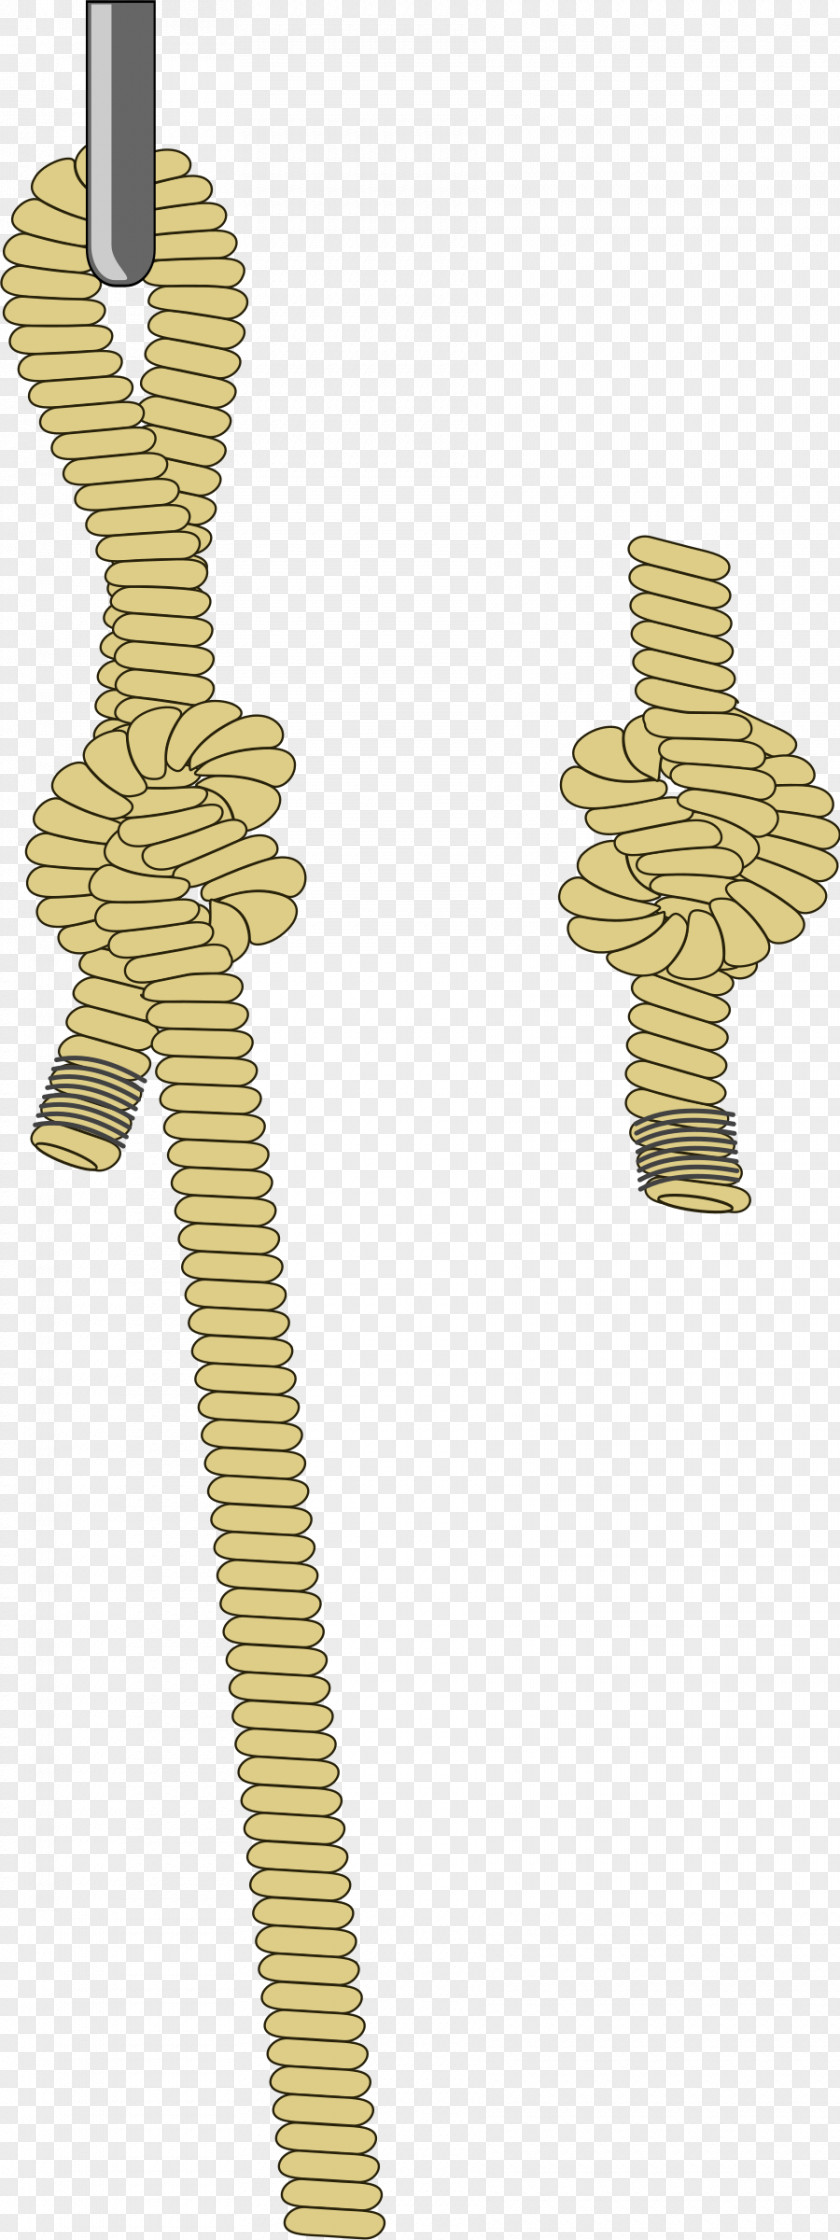 String Rope Knot Lasso Clip Art PNG